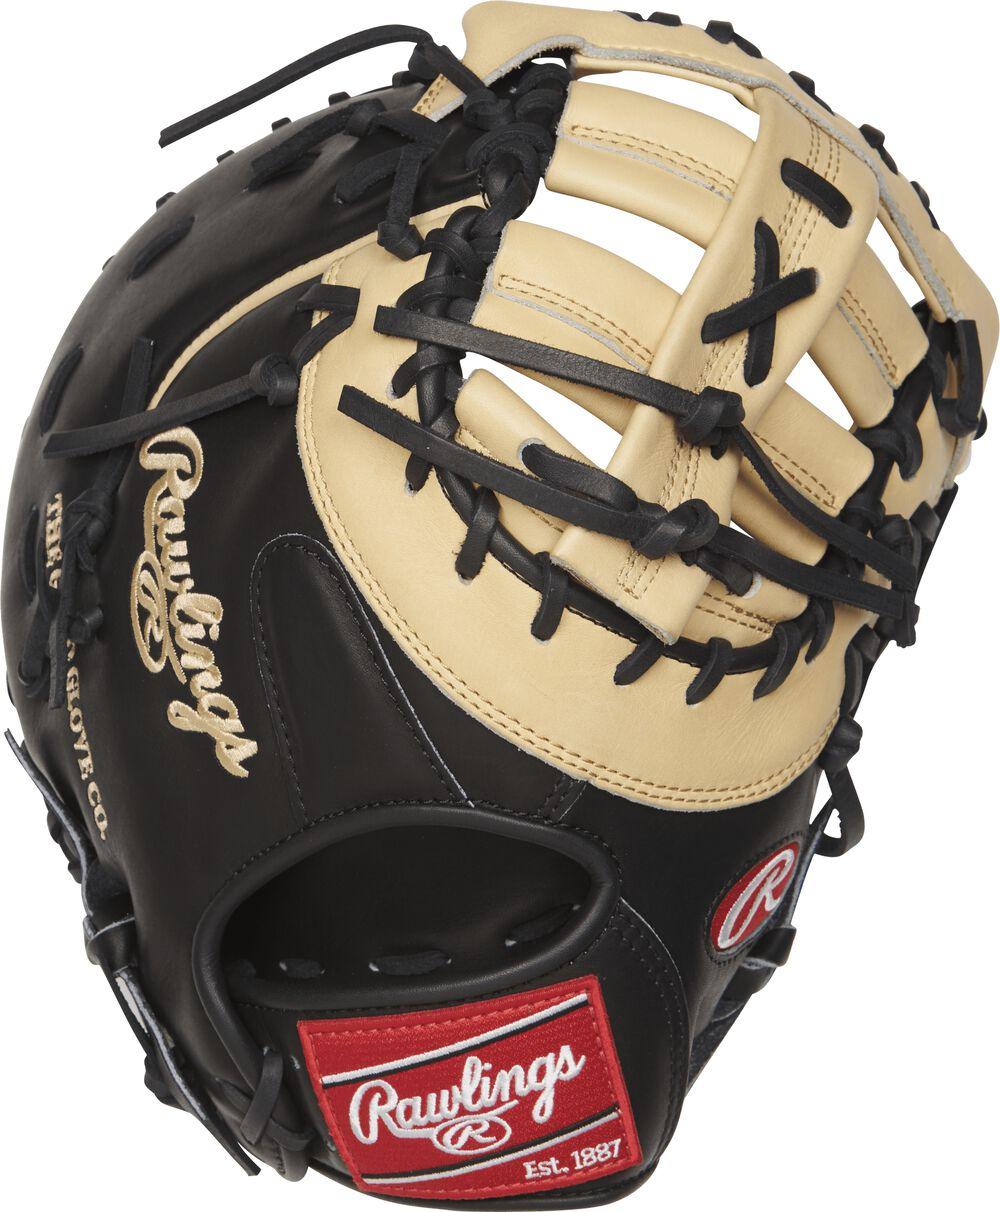 Heart of the Hide 13" First Base Senior Baseball Glove - Sports Excellence